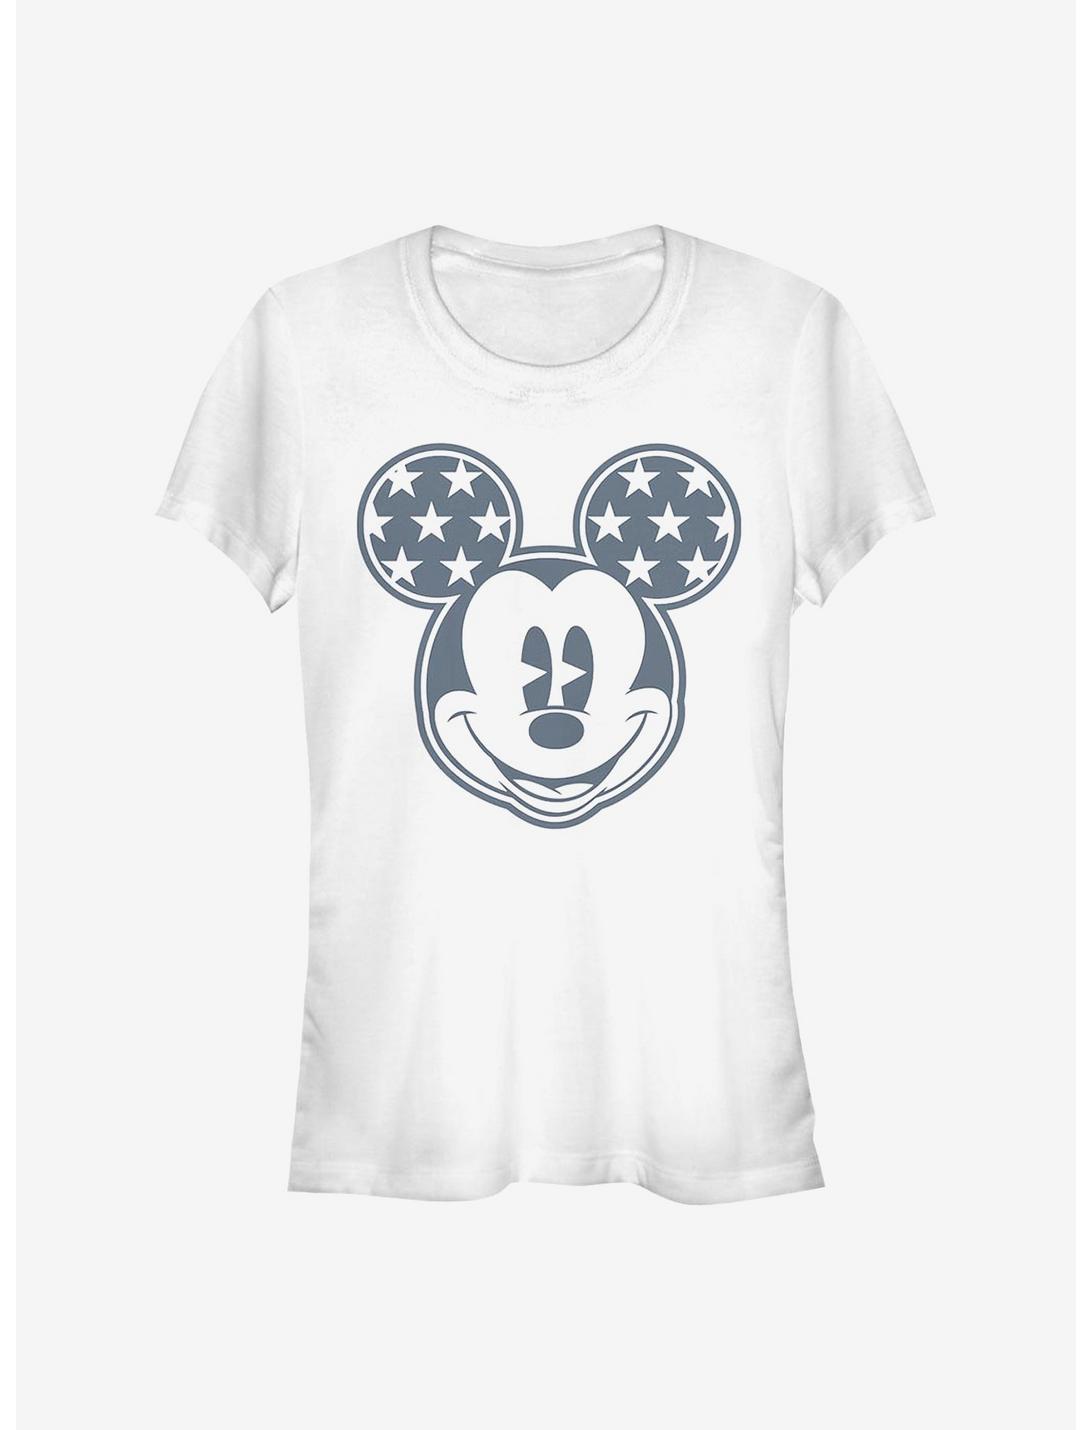 Disney Mickey Mouse Mickey Star Ears Girls T-Shirt, WHITE, hi-res